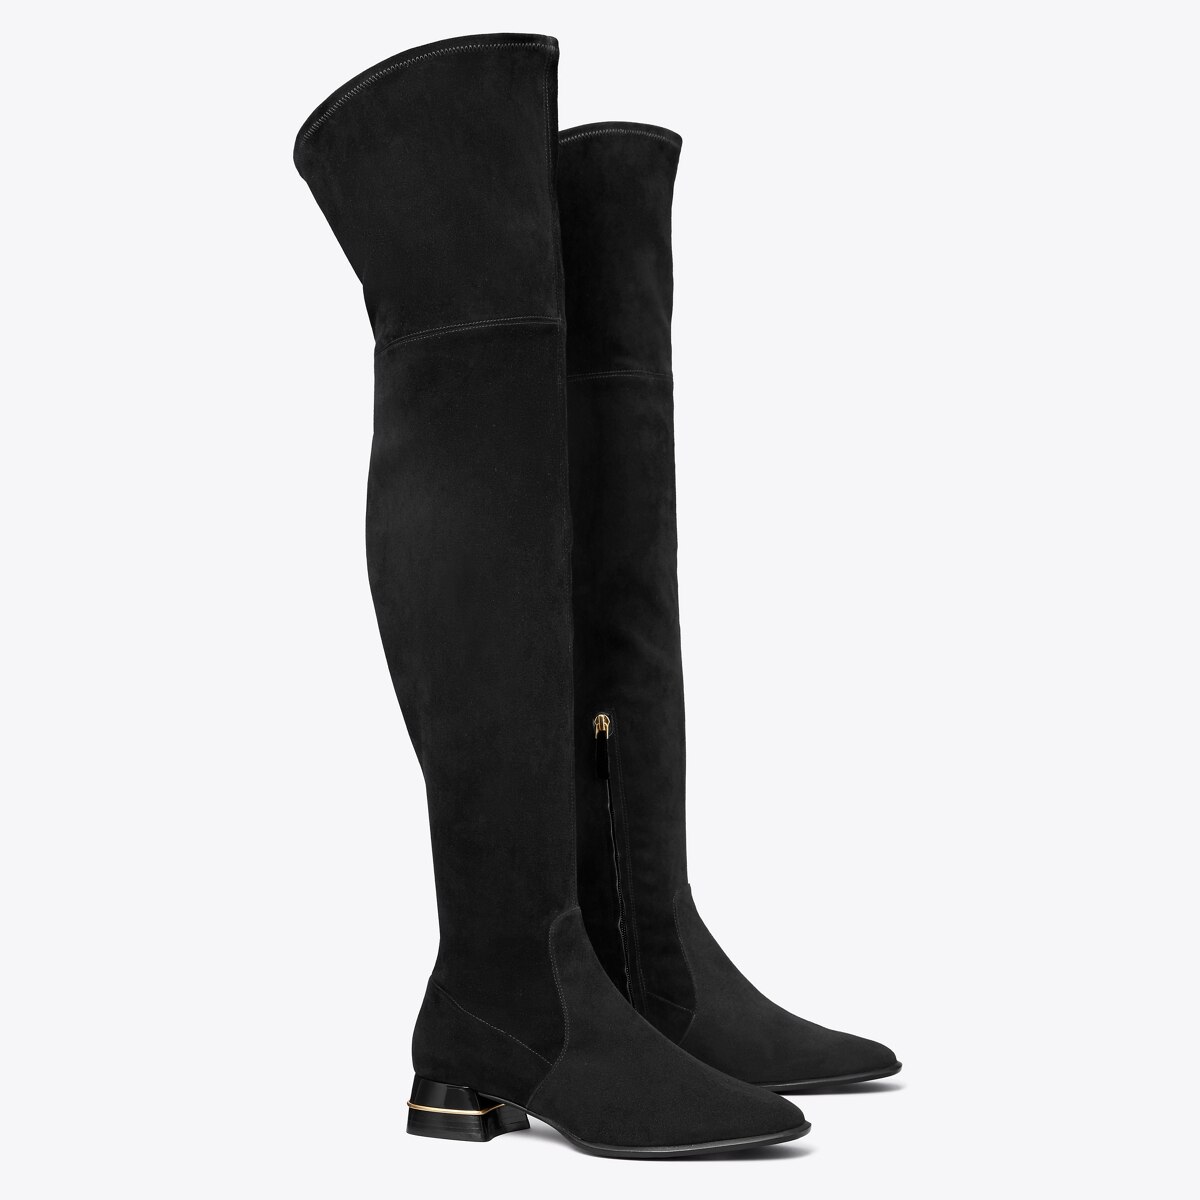 Multi-Logo Stretch Over-the-Knee Boot: Women's Designer Boots | Tory Burch